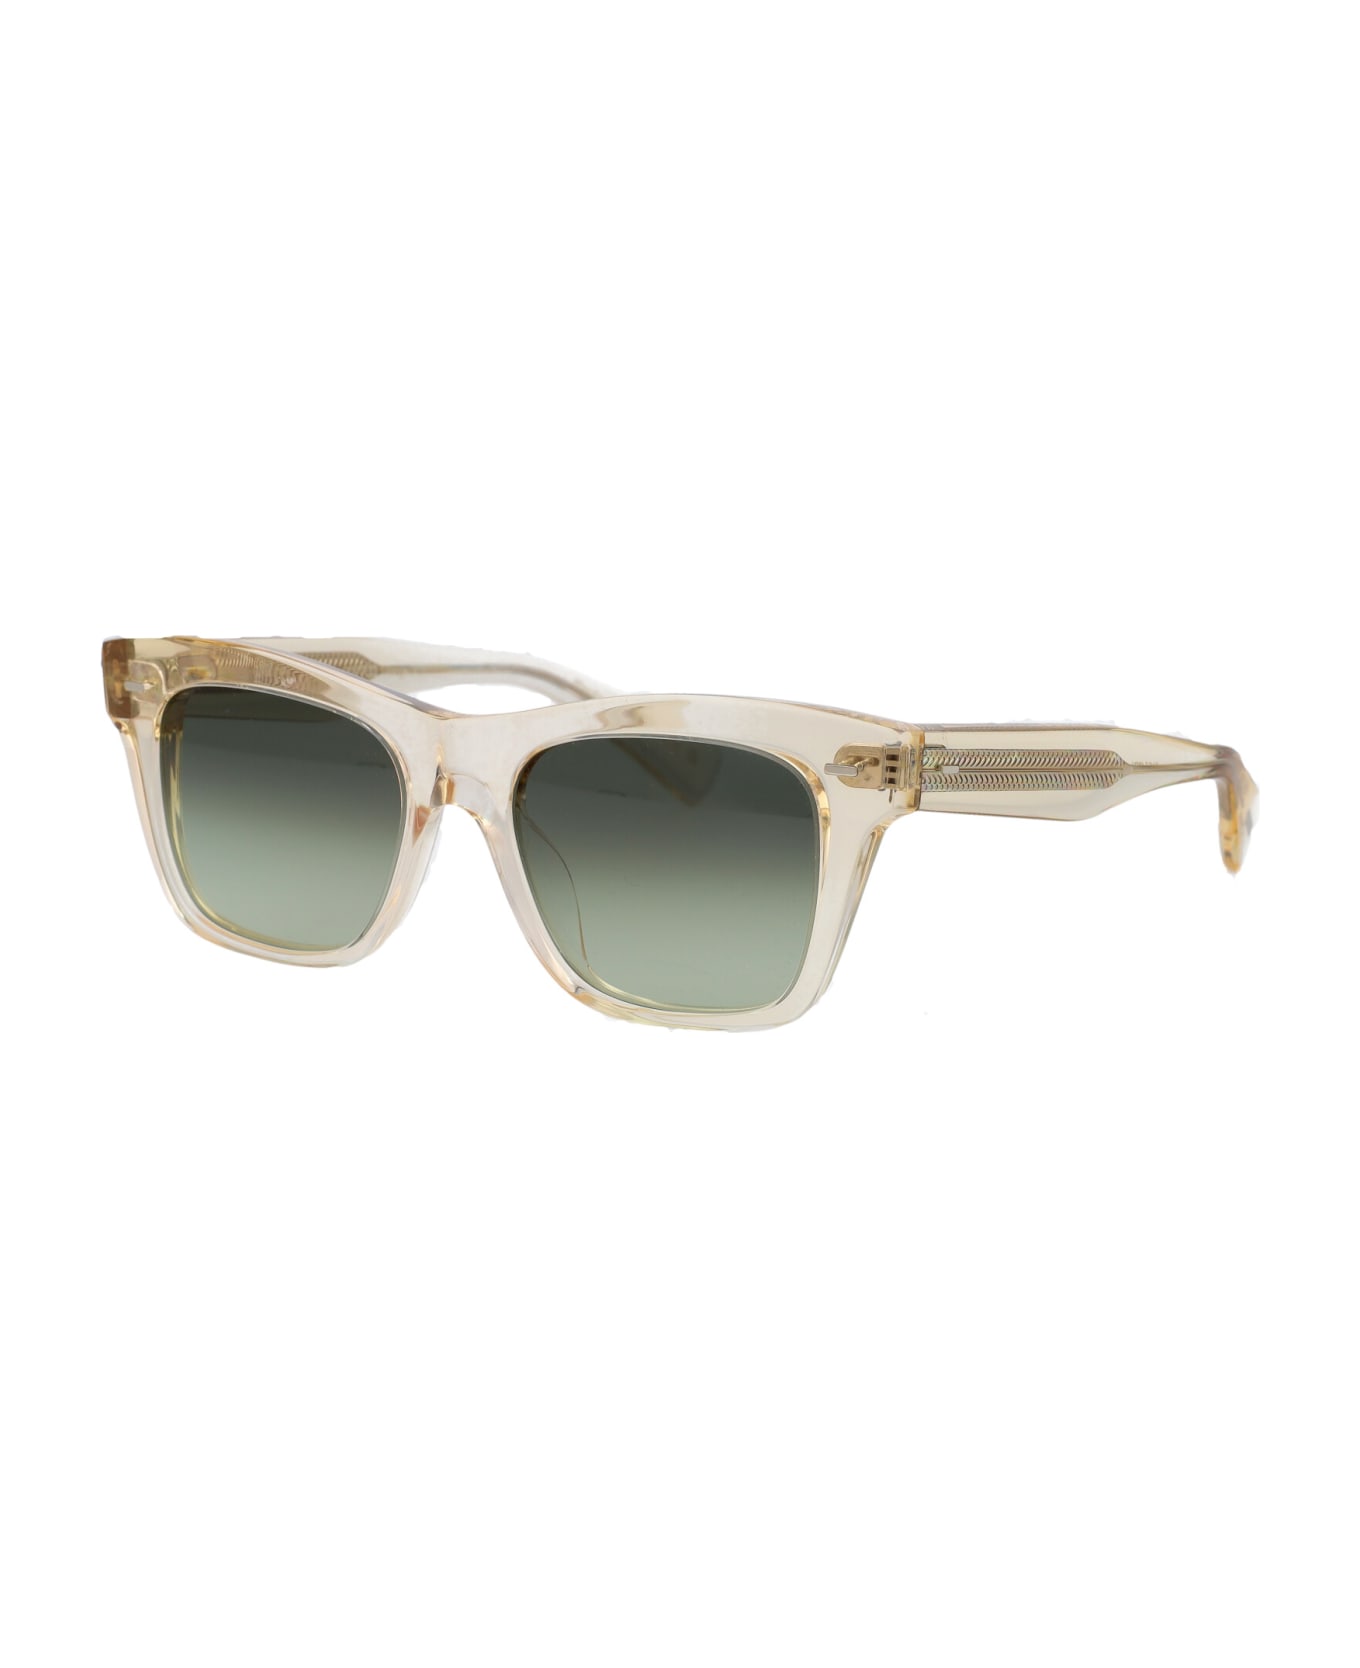 Oliver Peoples Ms. Oliver Sunglasses - 1094BH Buff